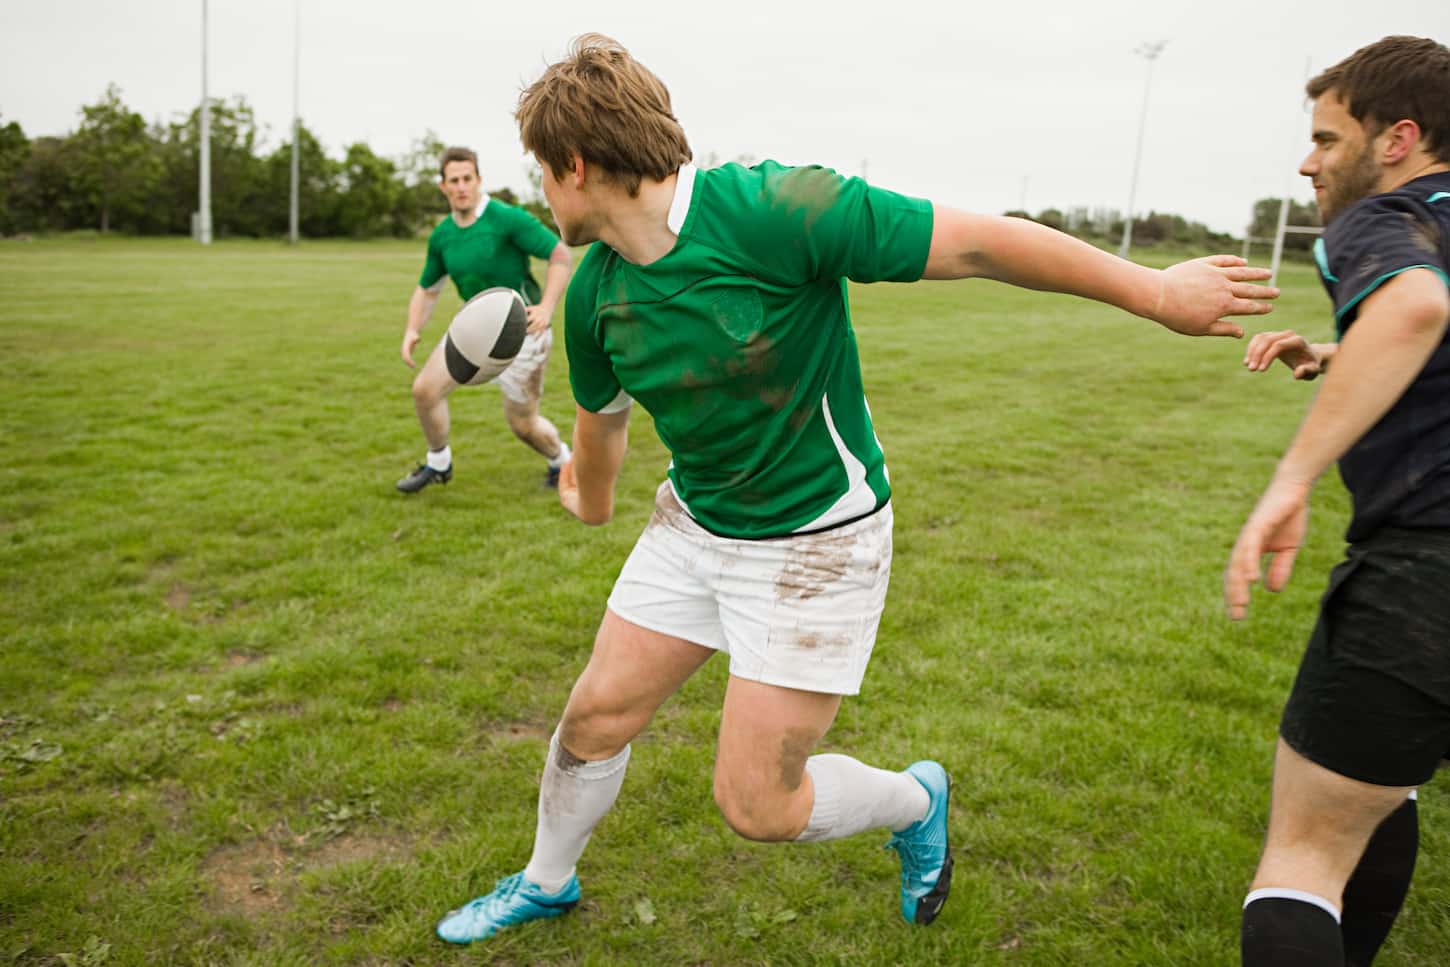 An image of gentlemen playing rugby game in the field.